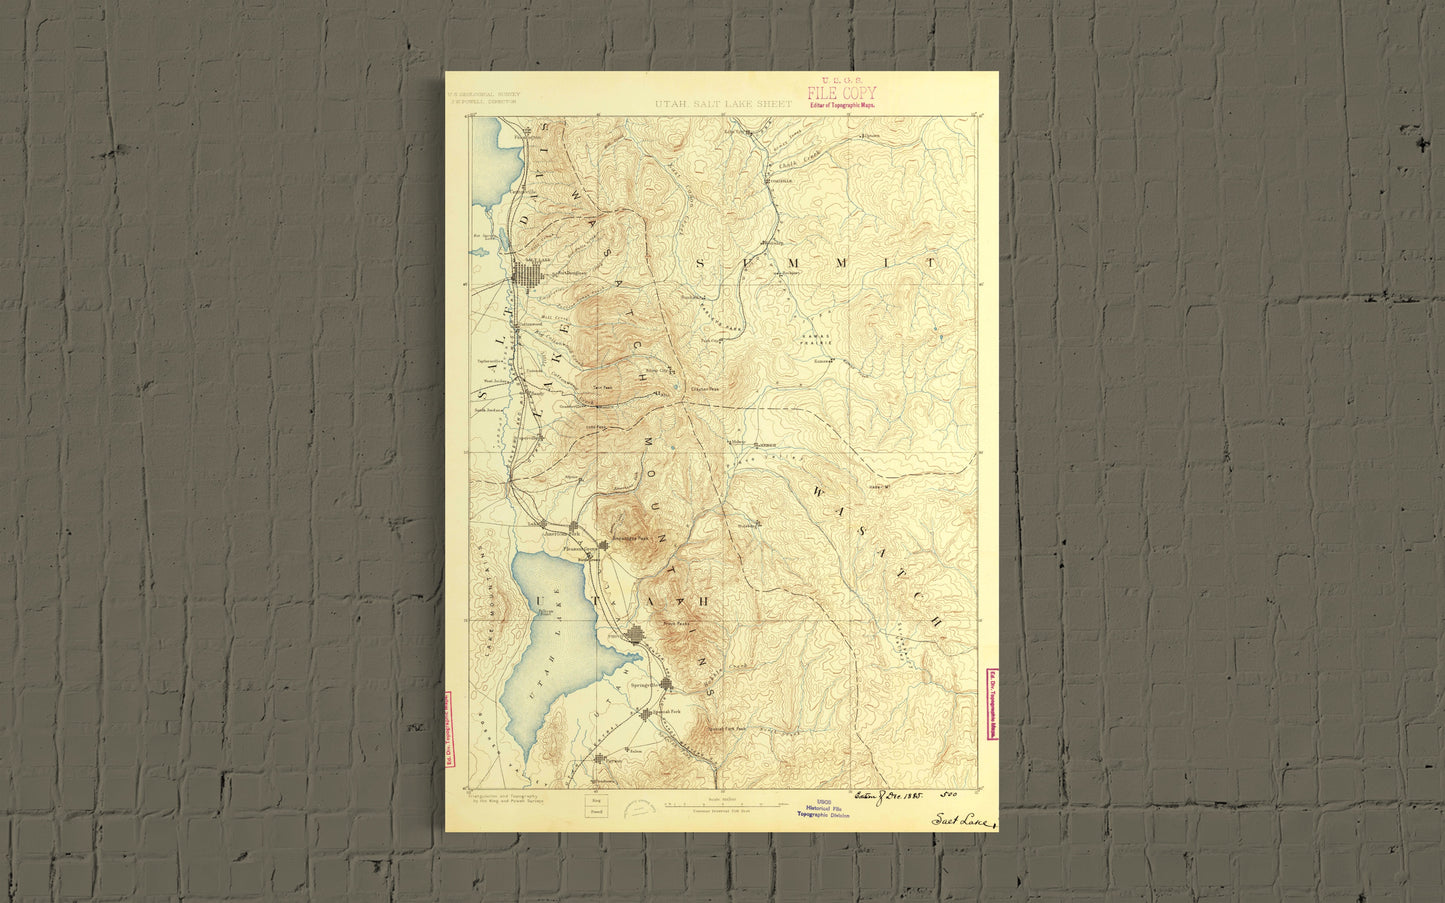 1885 Topographical Map of The Central Wasatch Mountains